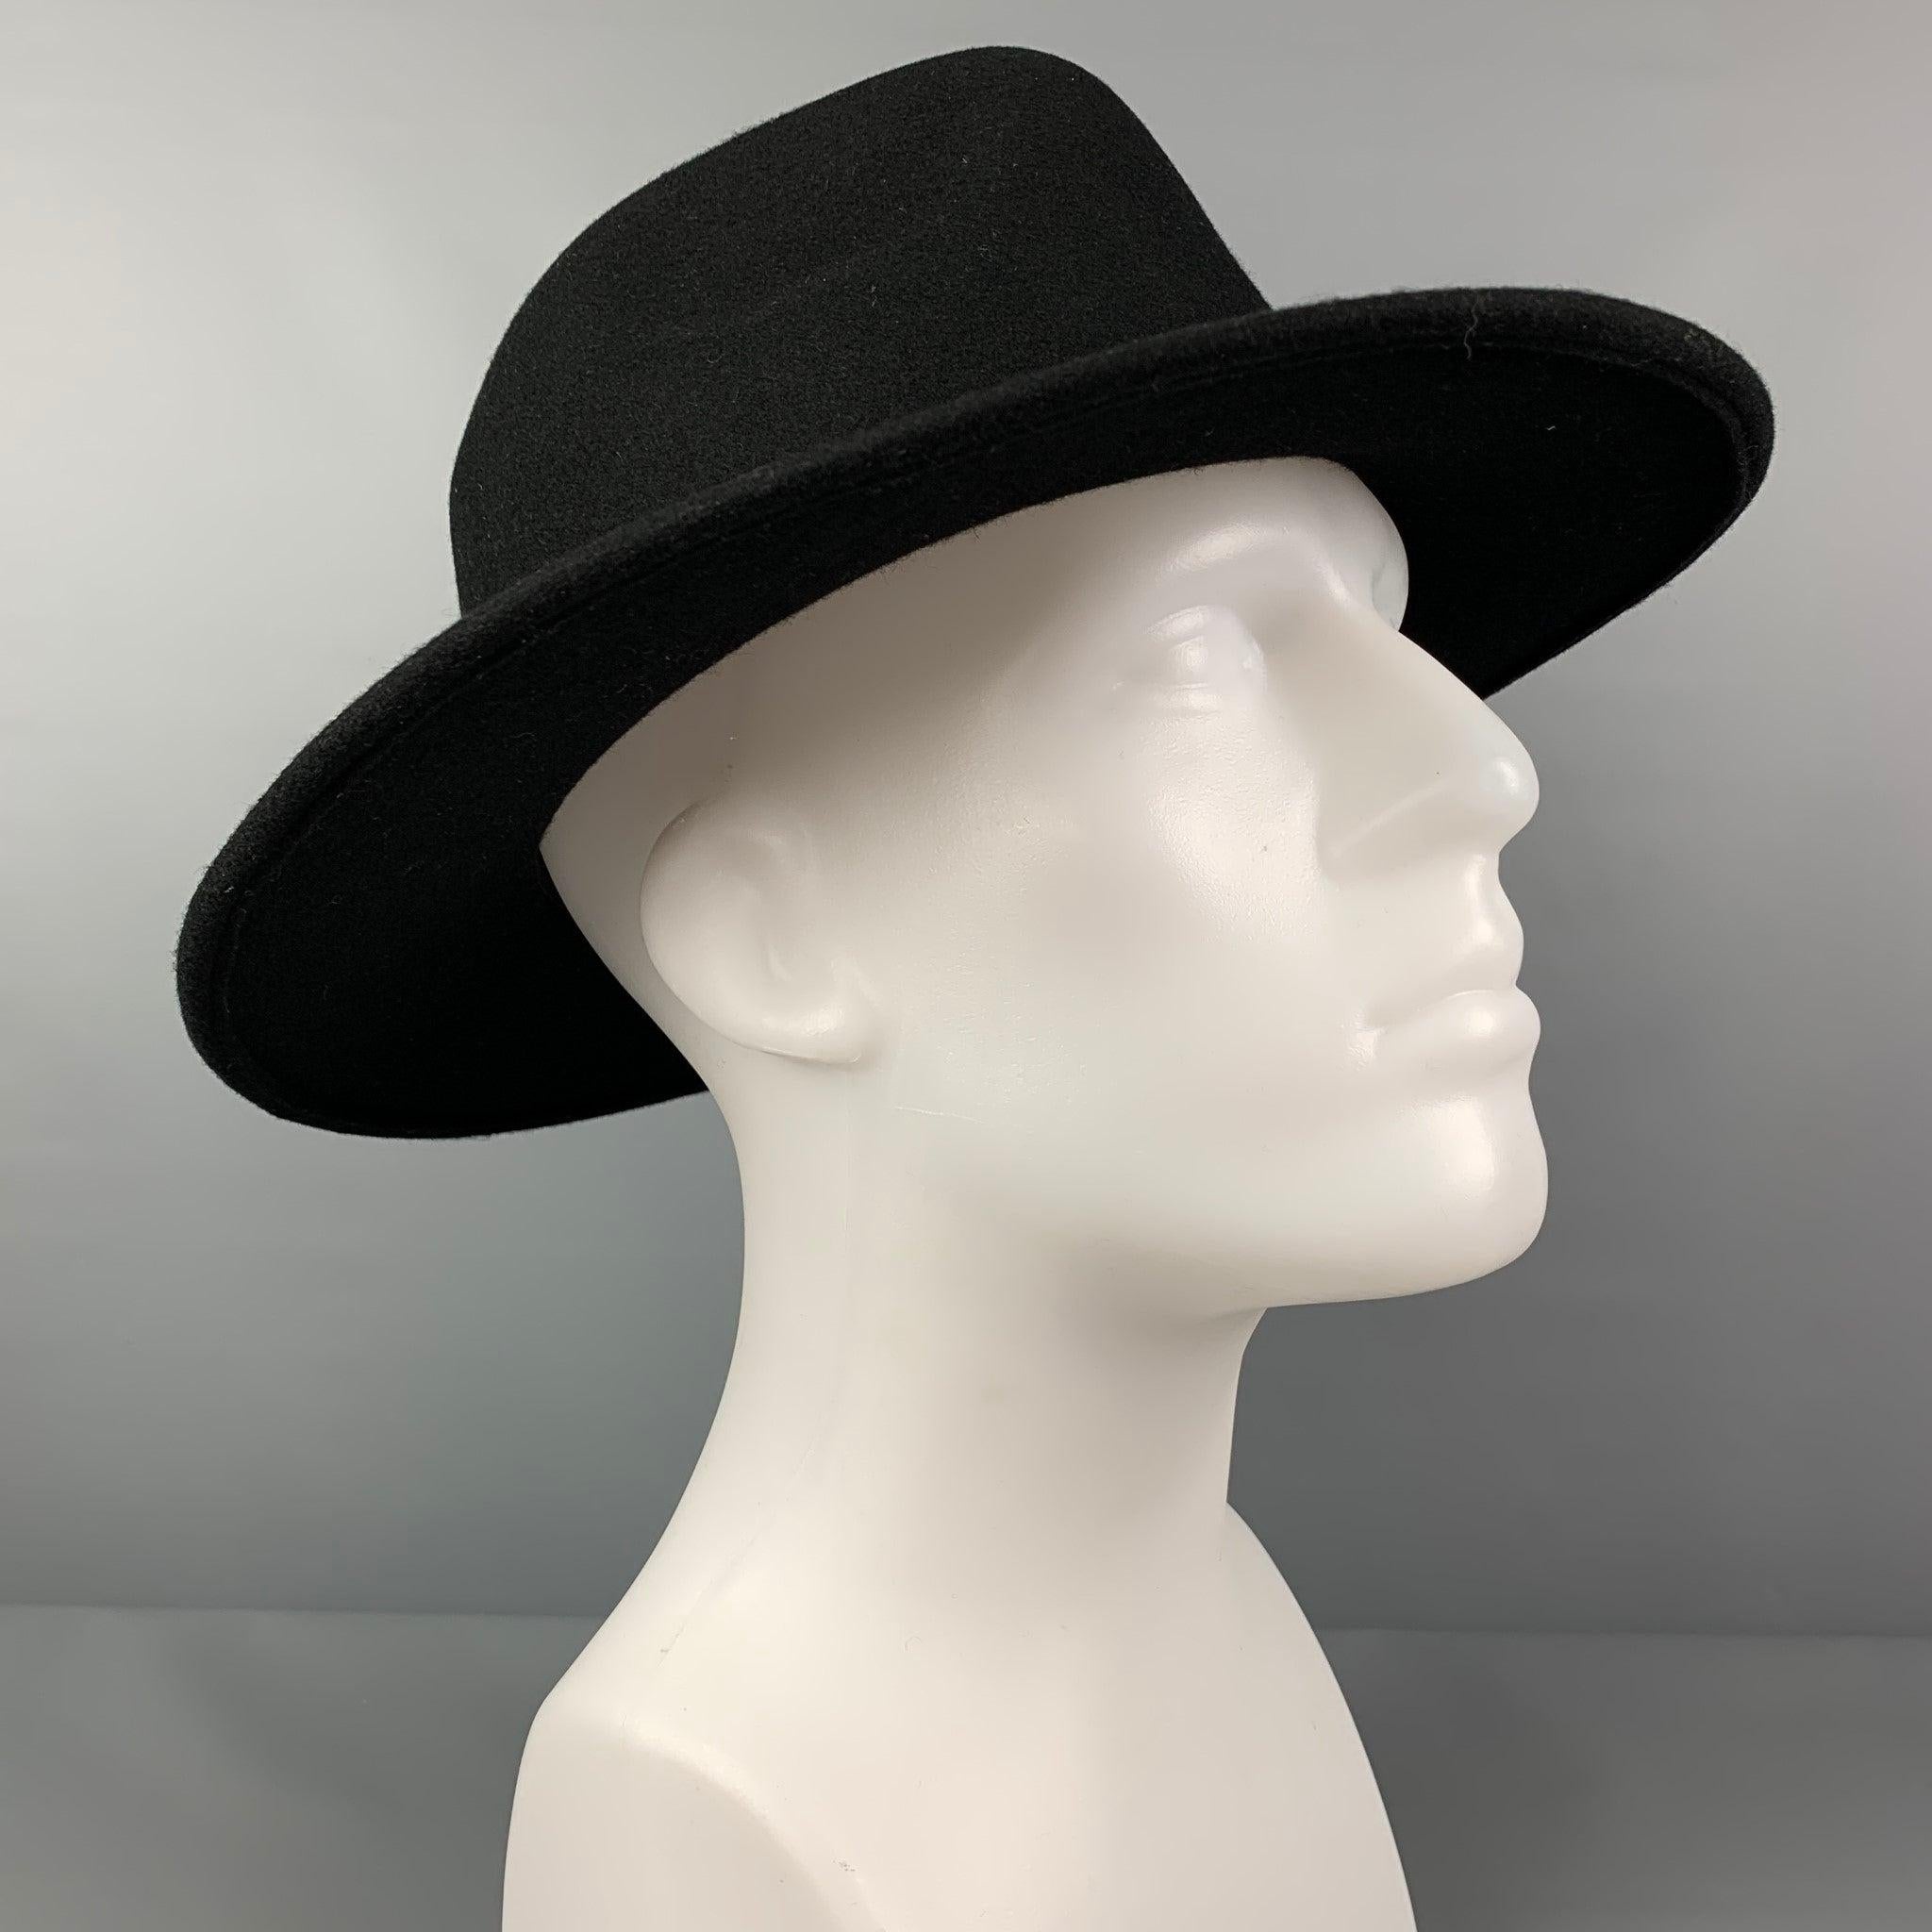 PAUL SMITH hat comes in a black wool featuring a orange drawstring design.
Very Good
Pre-Owned Condition. 

Marked:   L 

Measurements: 
  Opening: 23 inches  Brim: 3 inches  Height: 4.25 inches 
  
  
 
Reference: 120339
Category: Hats
More